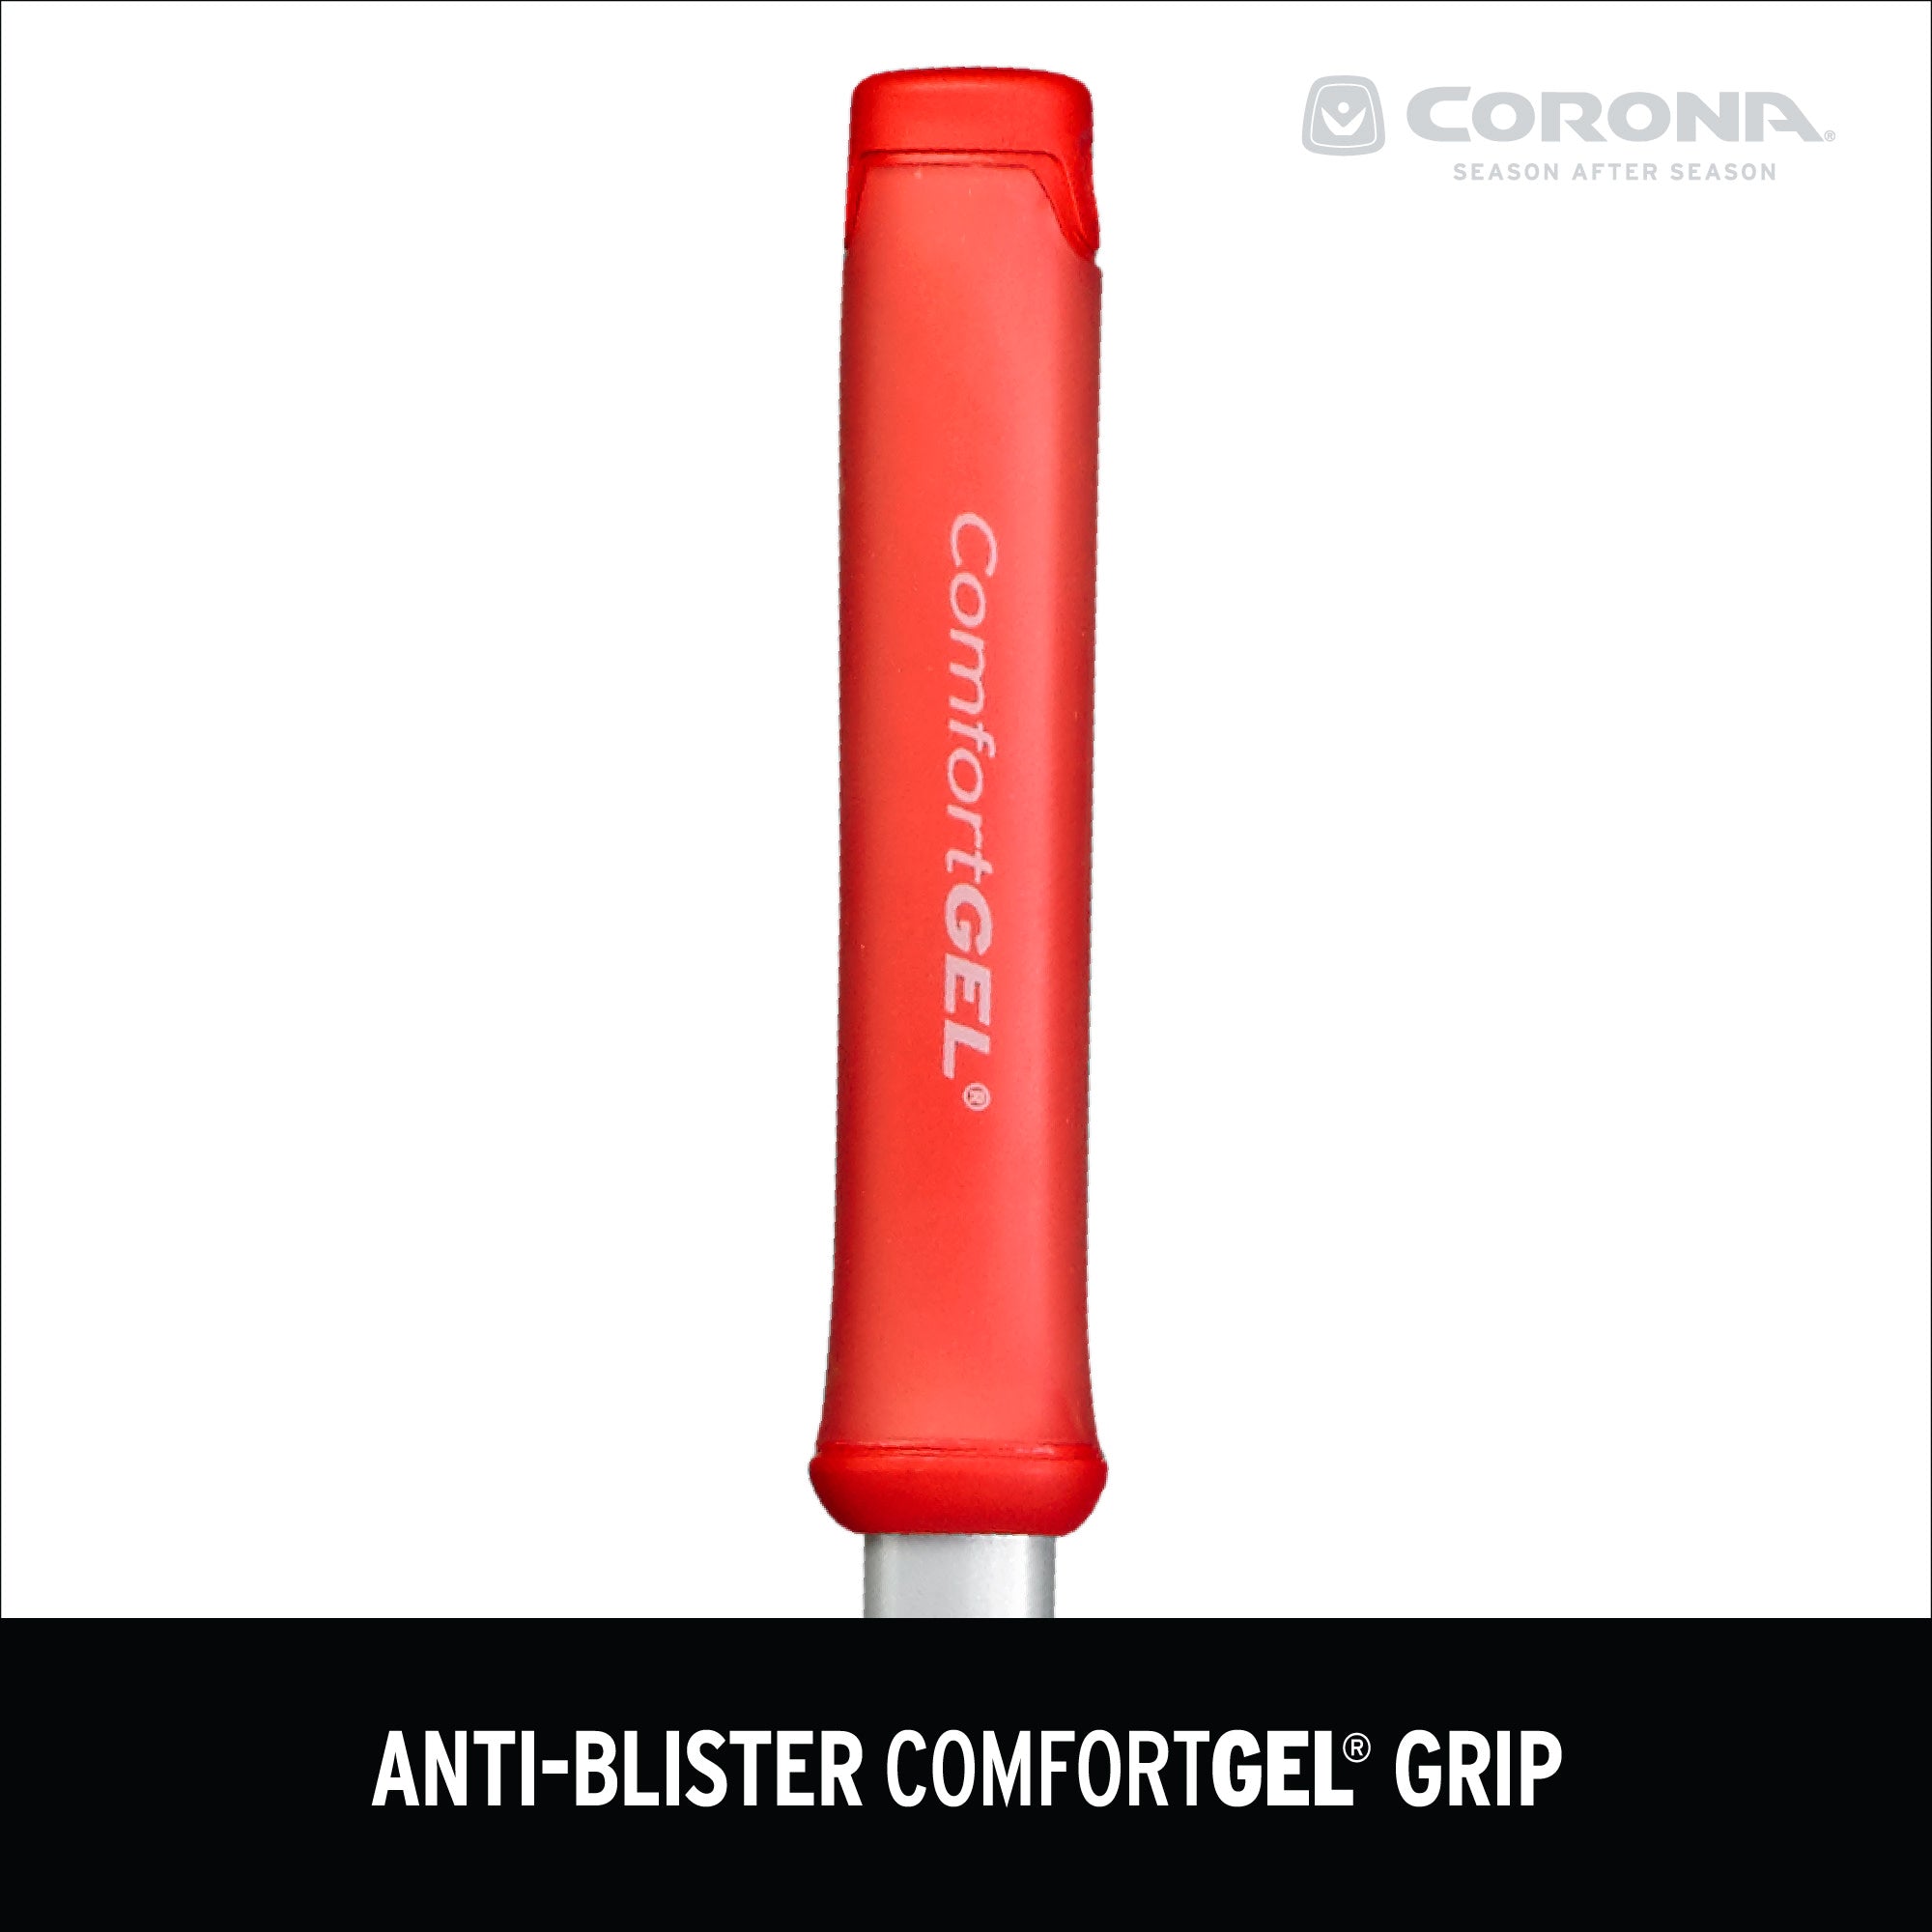 DiscCULTIVATOR® with ComfortGEL® Grip